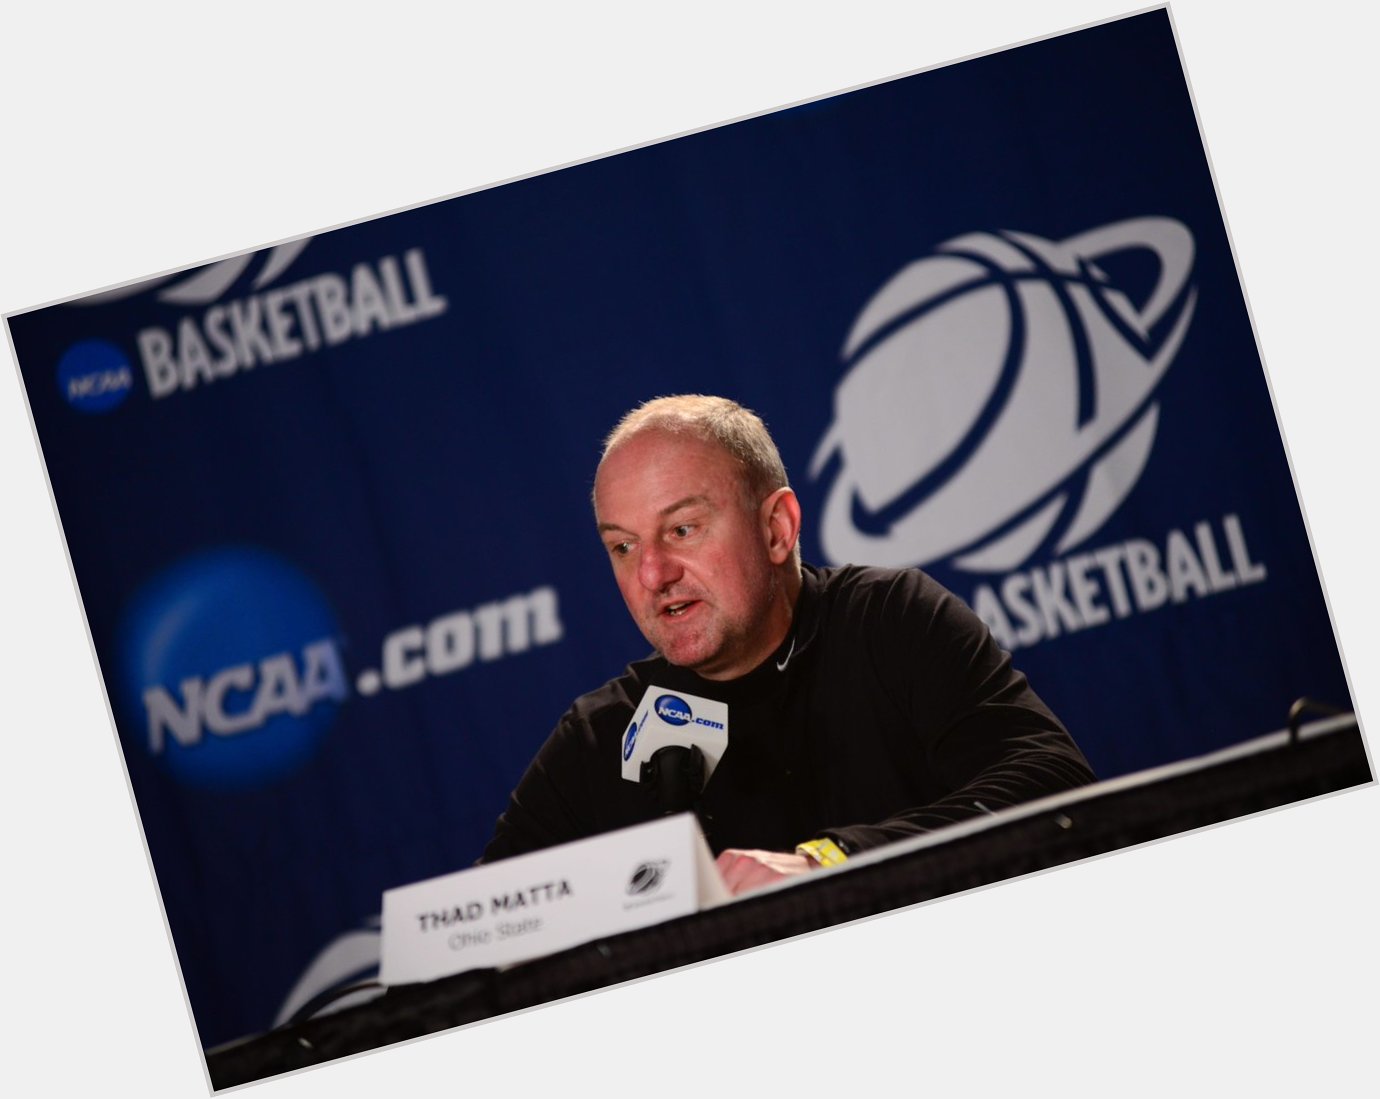 A day late, but a very Happy Birthday to coach Thad Matta! 